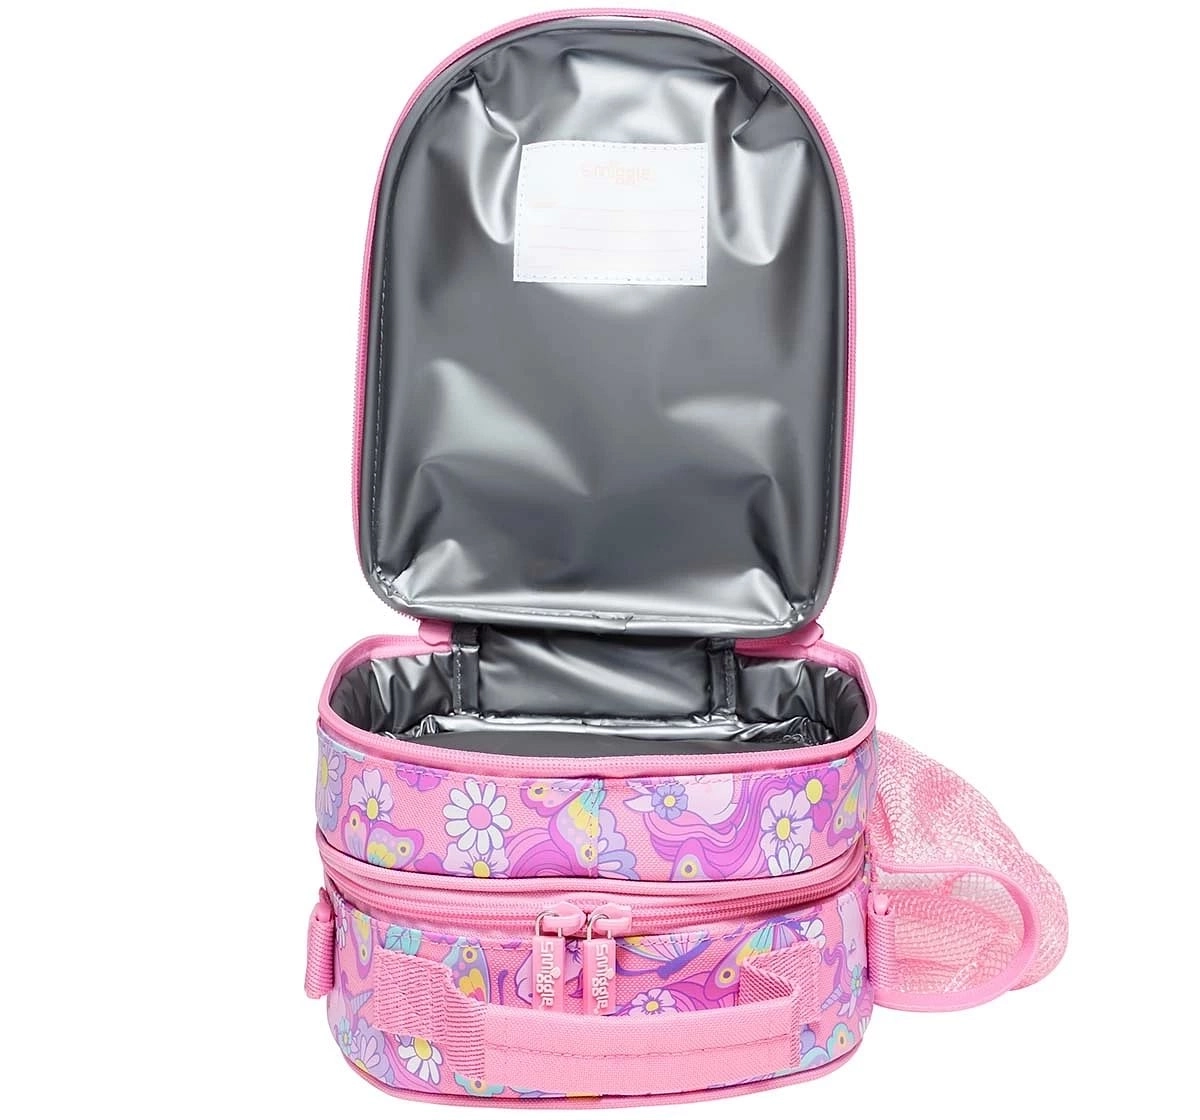 Smiggle Hey There Collection Lunchbag Hardtop Pink, 4Y+